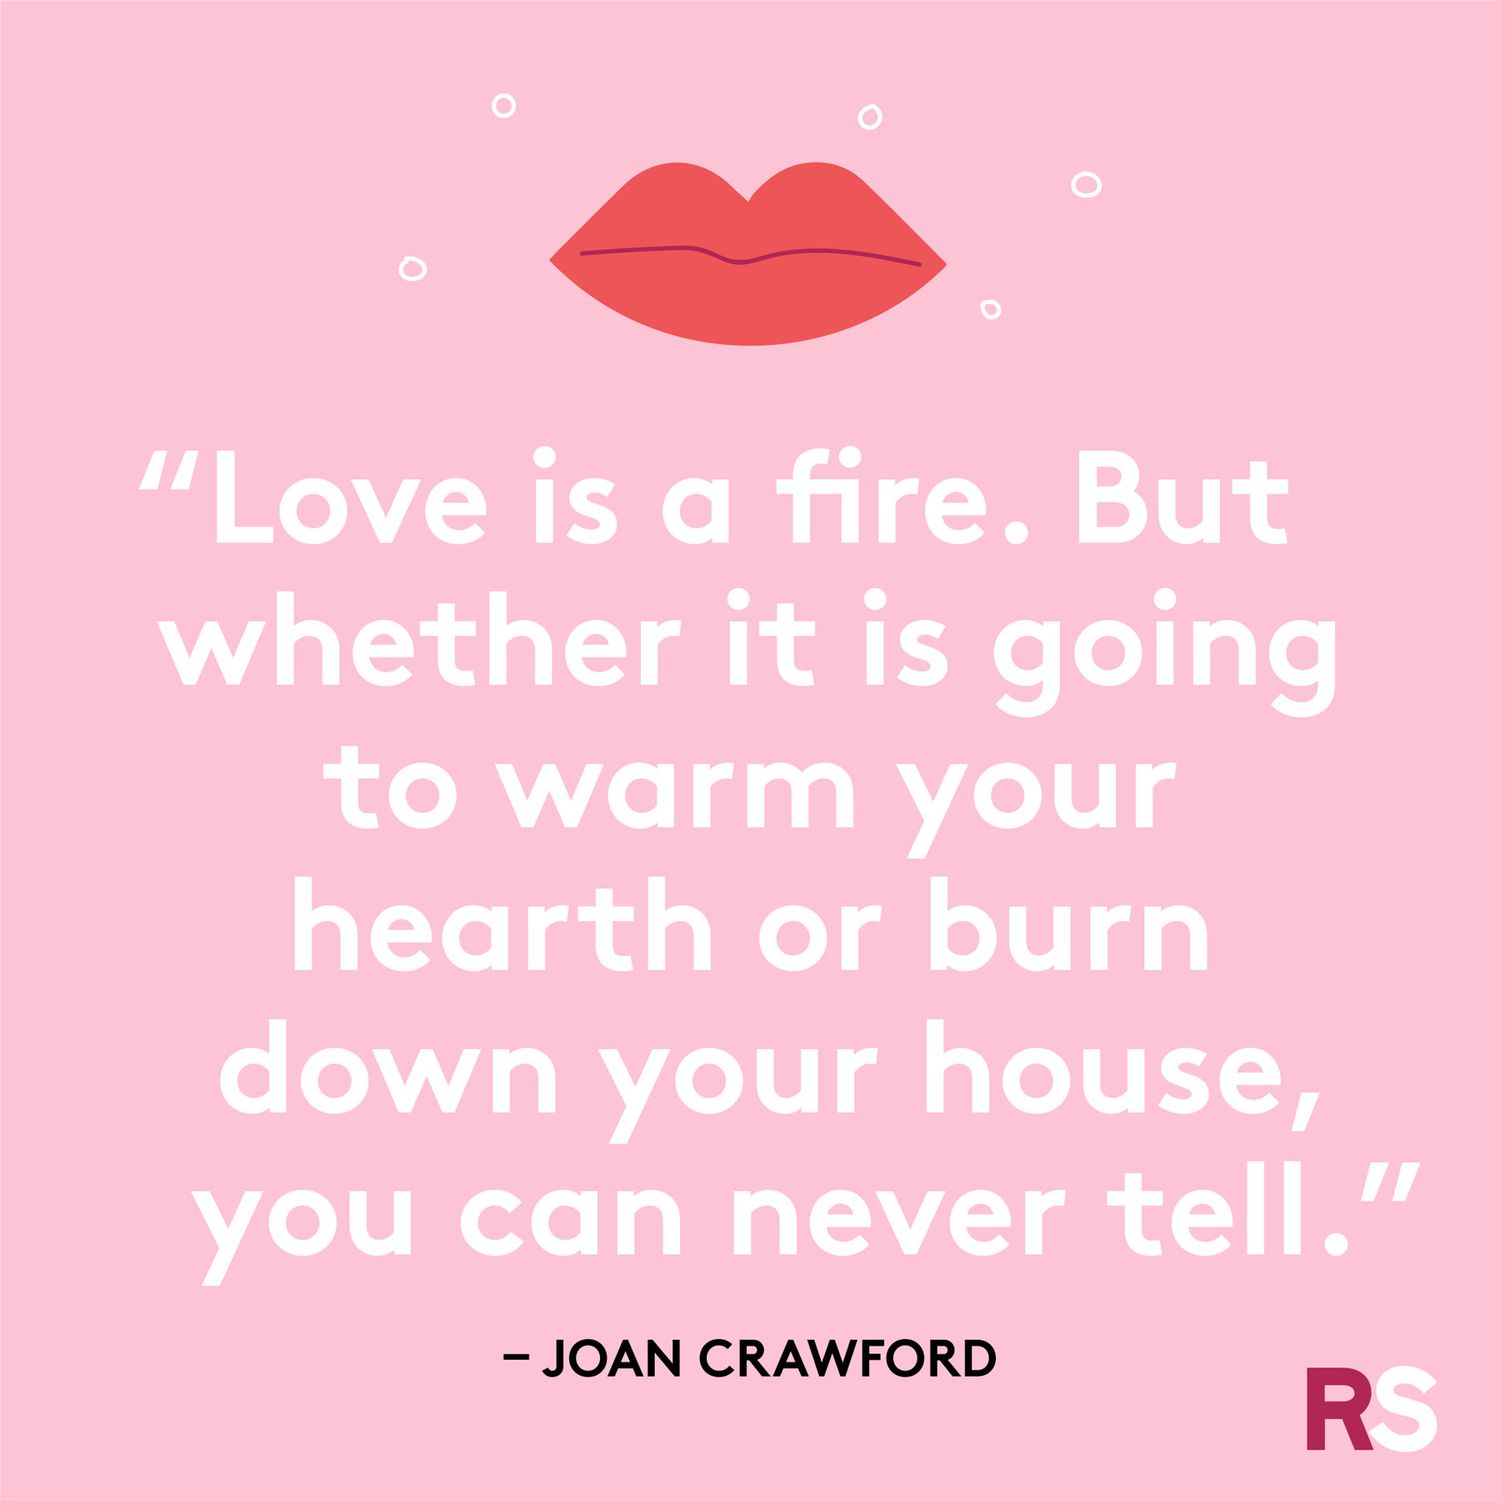 Love is a fire. But whether it is going to warm your hearth or burn down your house, you can never tell.